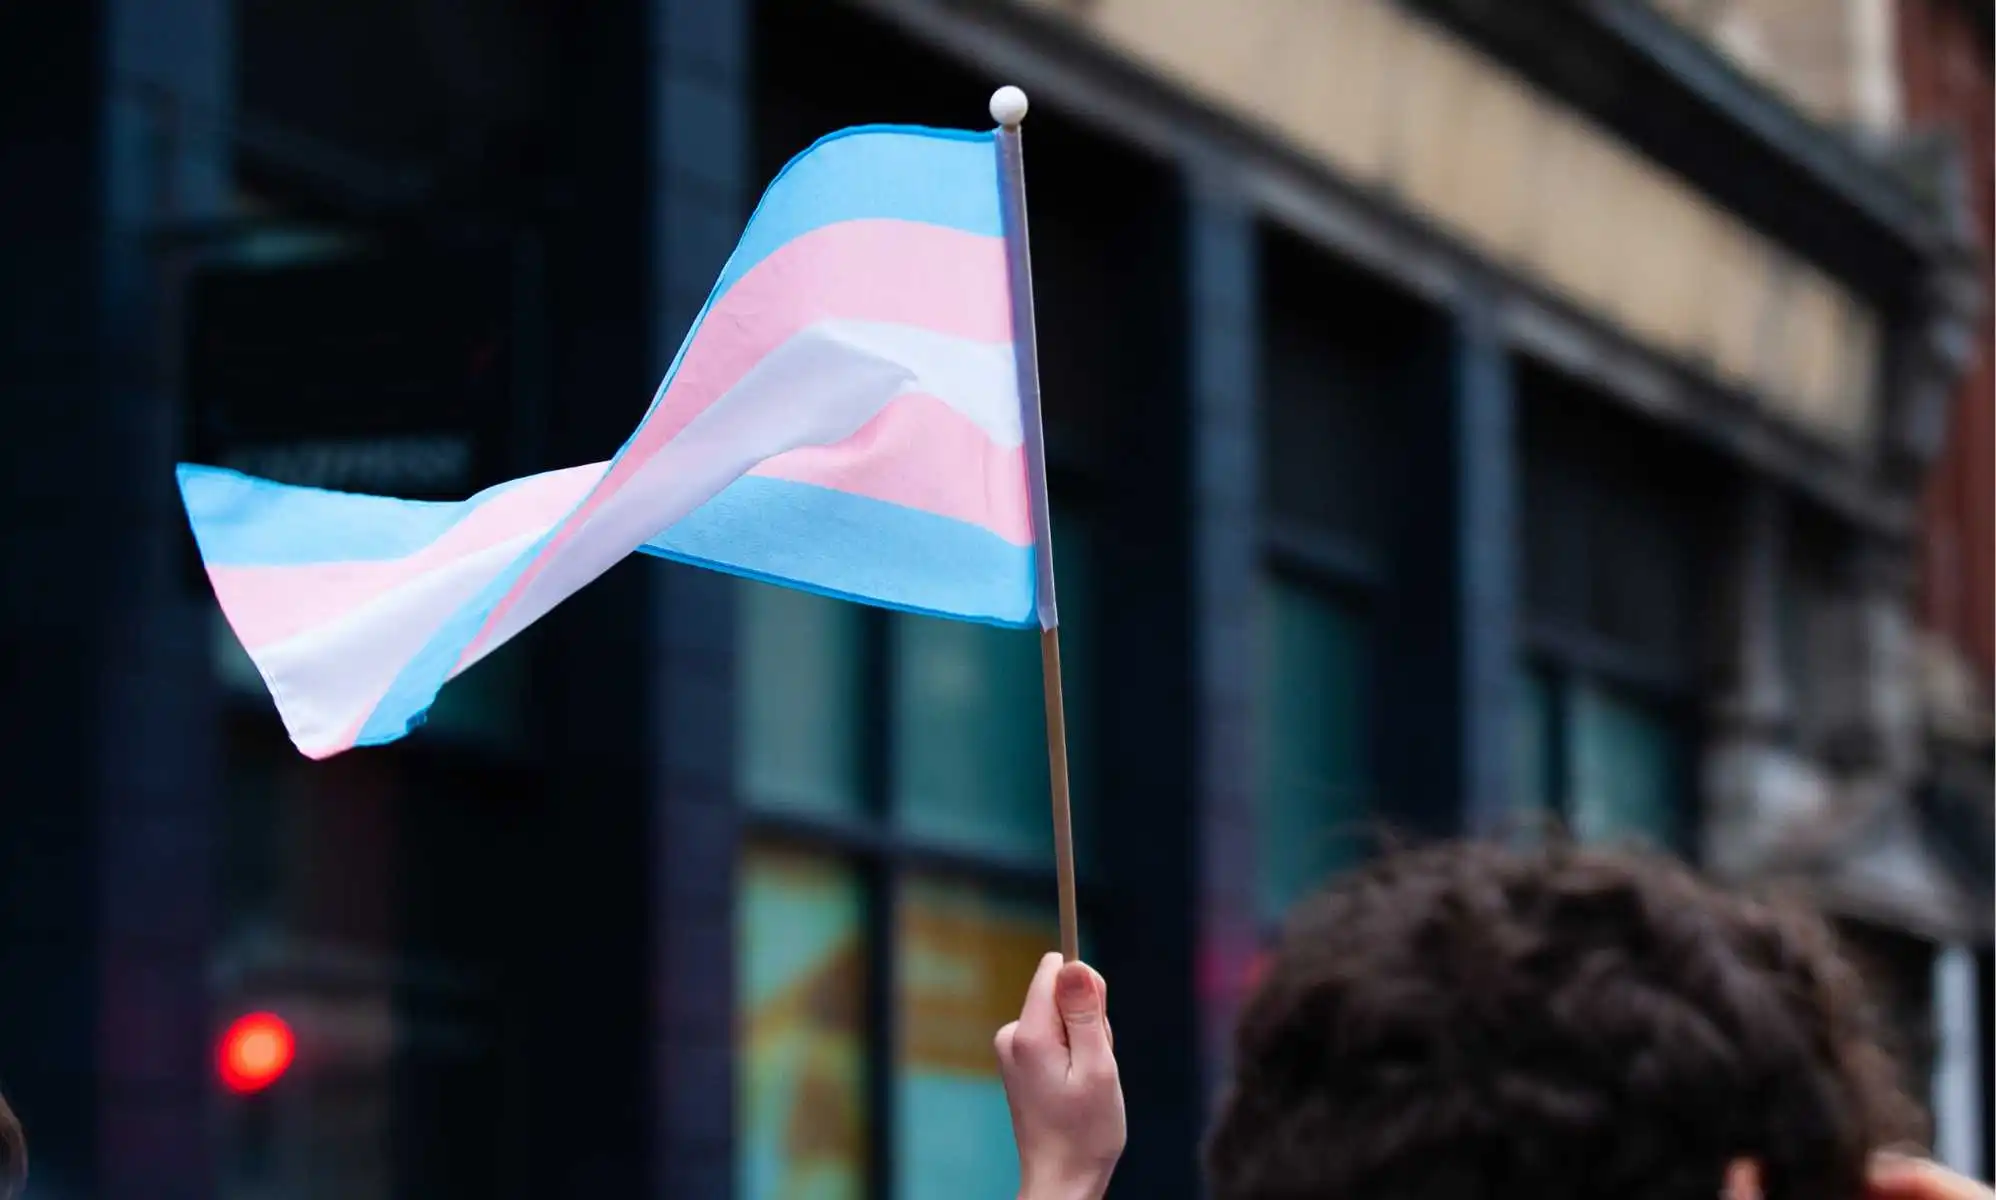 This US city has declared itself a ‘sanctuary’ for trans people